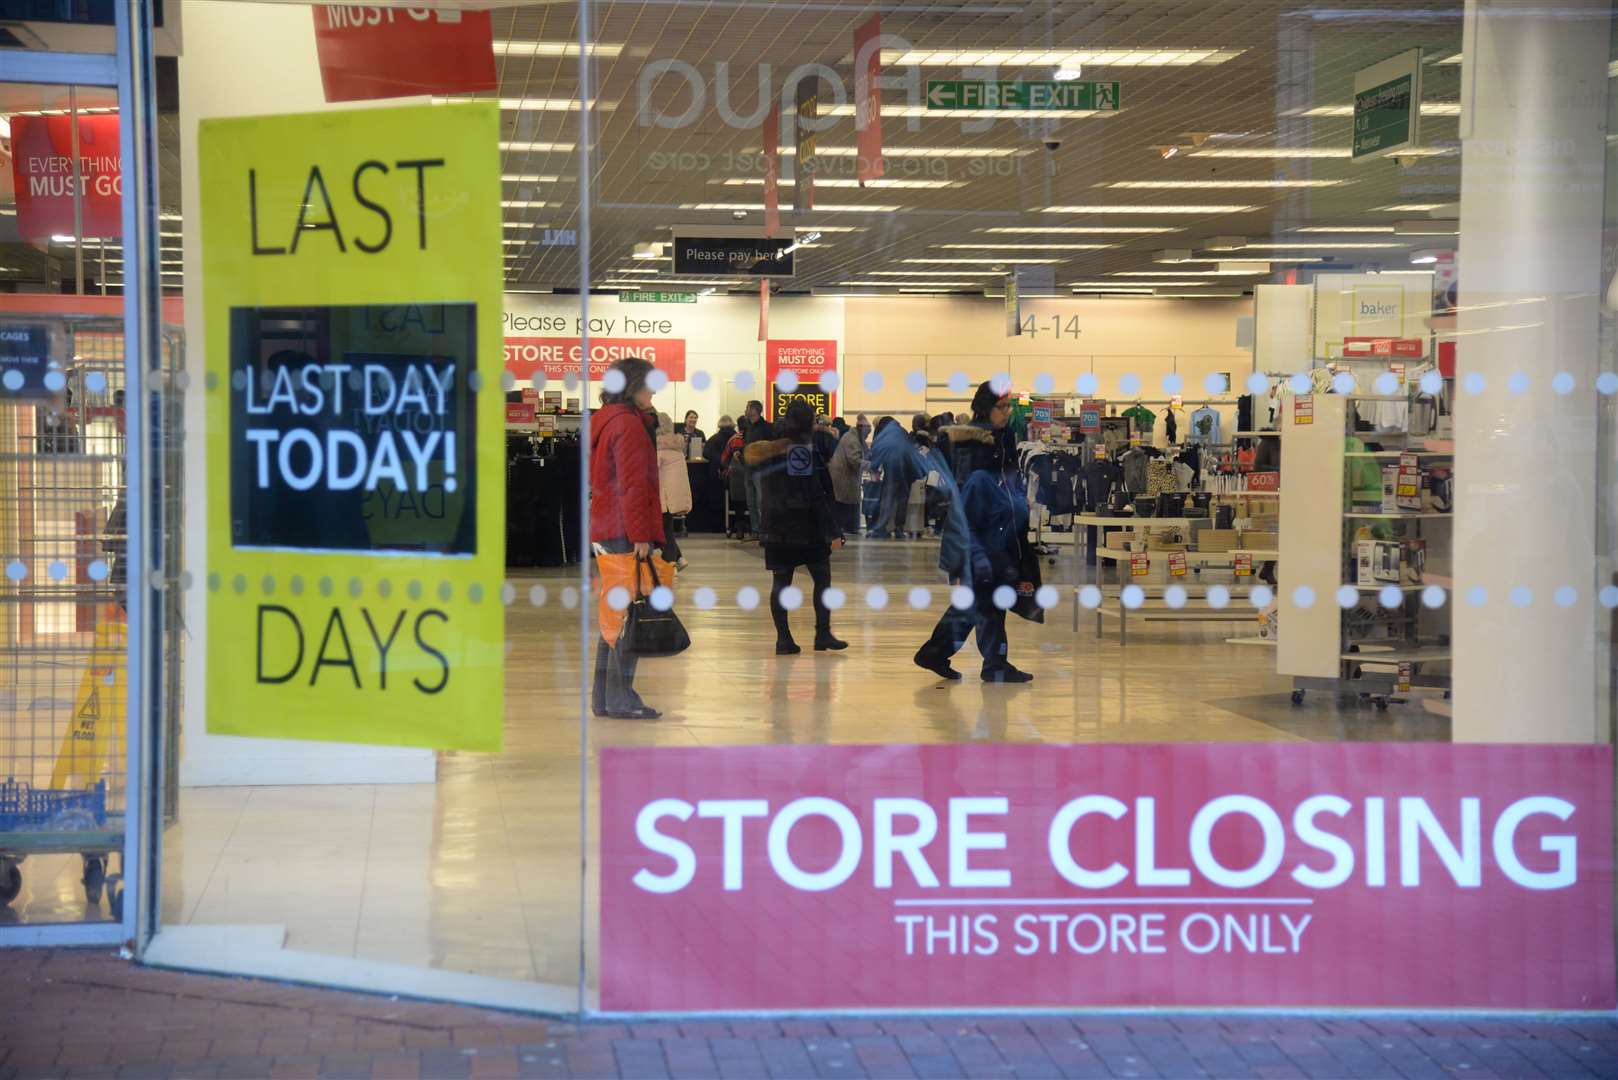 The last shoppers and staff inside the Debenhams store in Chatham which closed in 2020